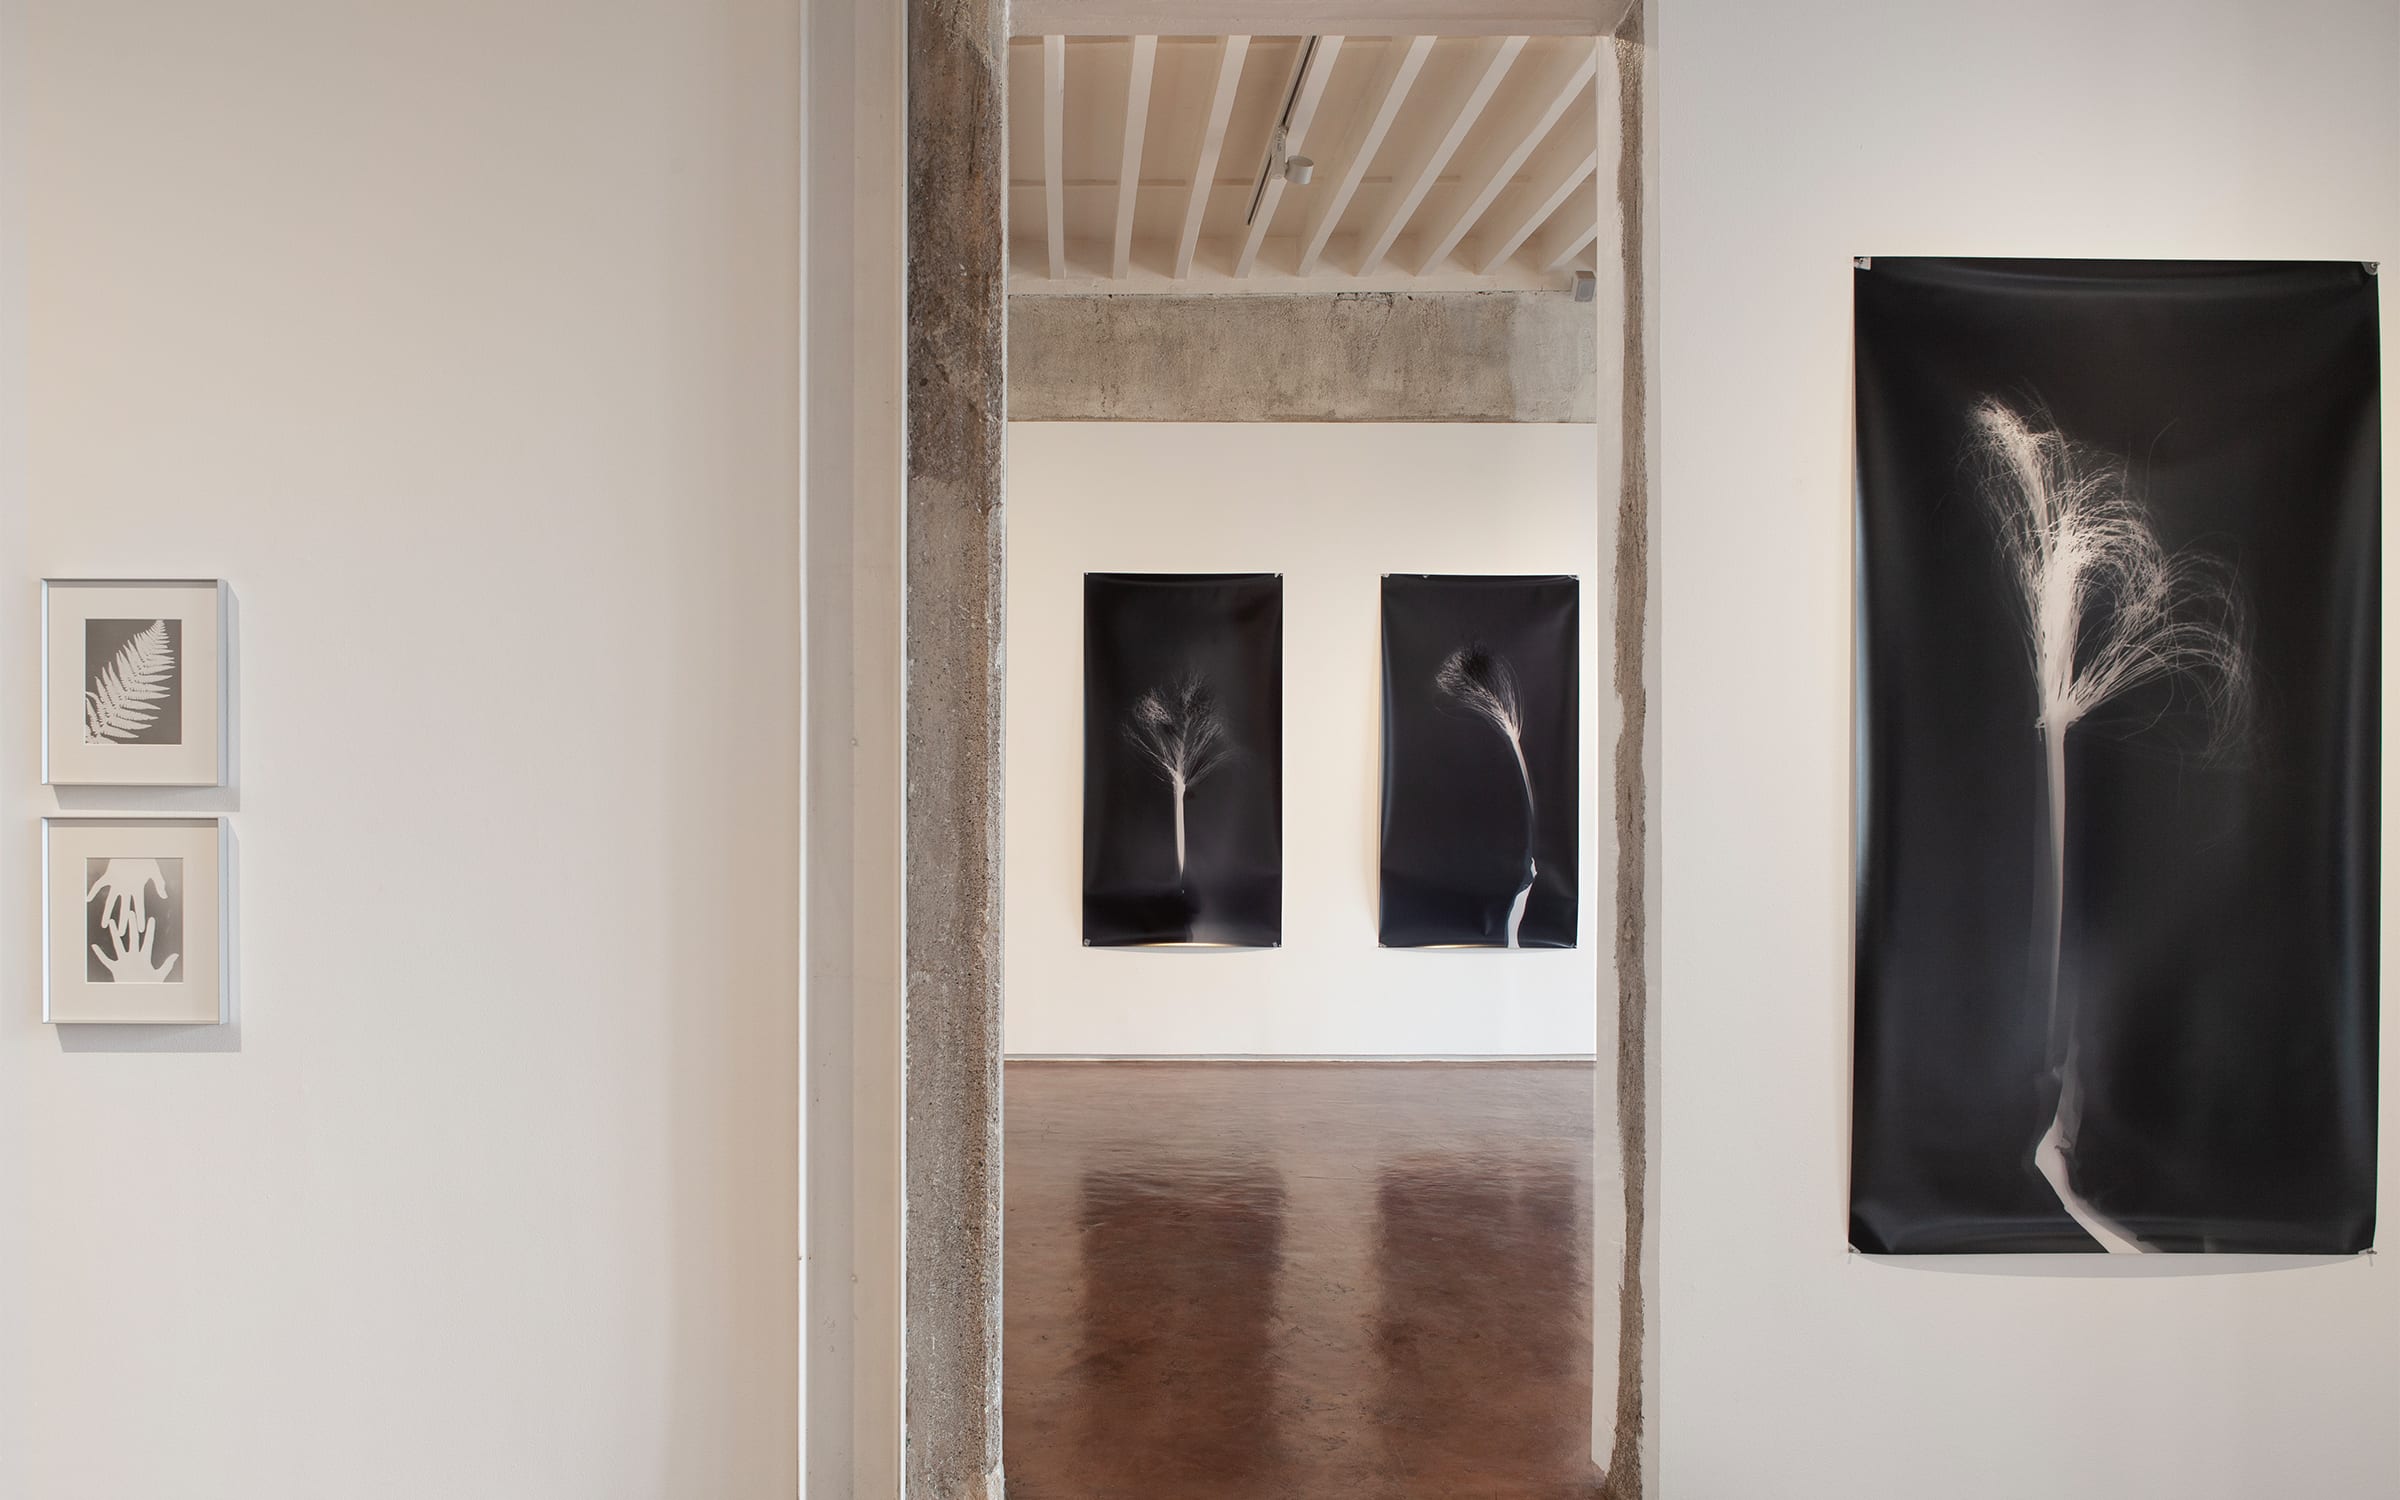 Installation view of ‘Contact’, with works by Simryn Gill and Anwar Jalal Shemza, Jhaveri Contemporary, Mumbai, February 2023. Courtesy of Jhaveri Contemporary. 